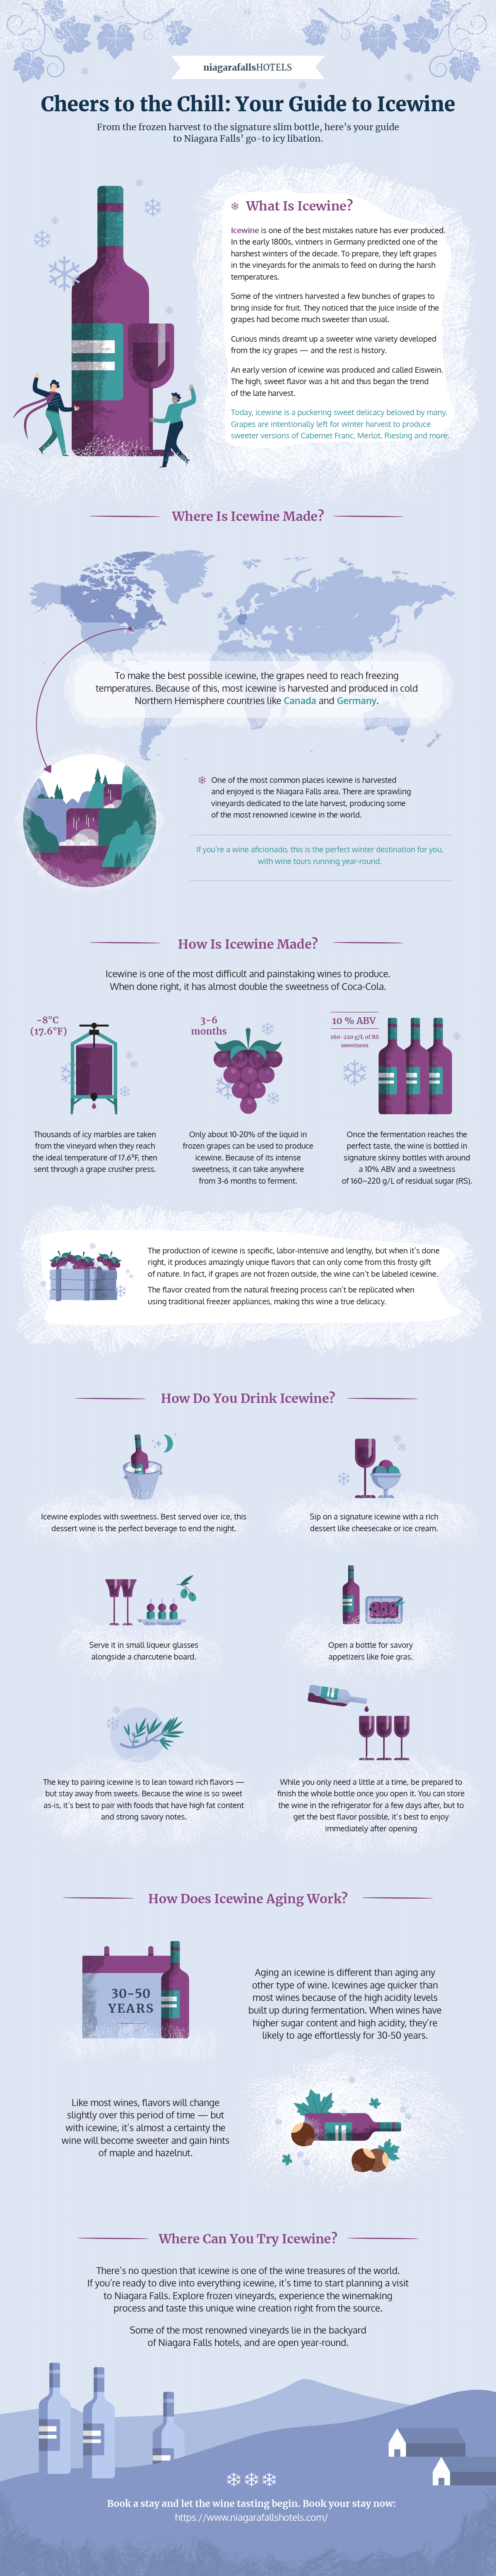 [Infographic] Cheers to the Chill: Your Guide to Icewine